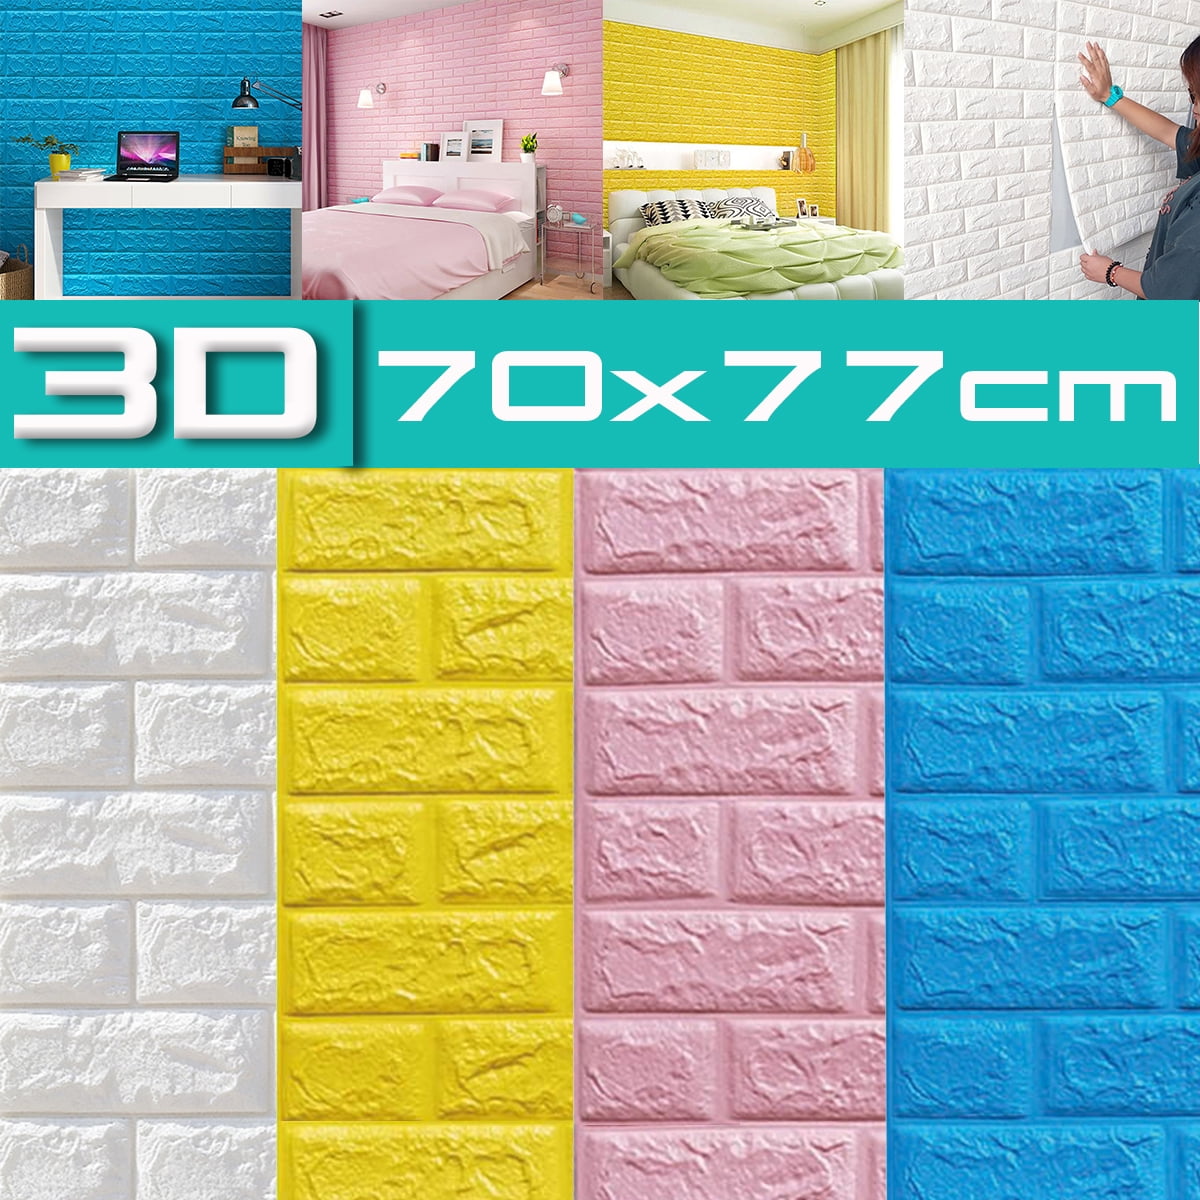 3D Tile Brick Wall Stickers Self-adhesive Foam Panel Wall Cover Decal Home Decor 